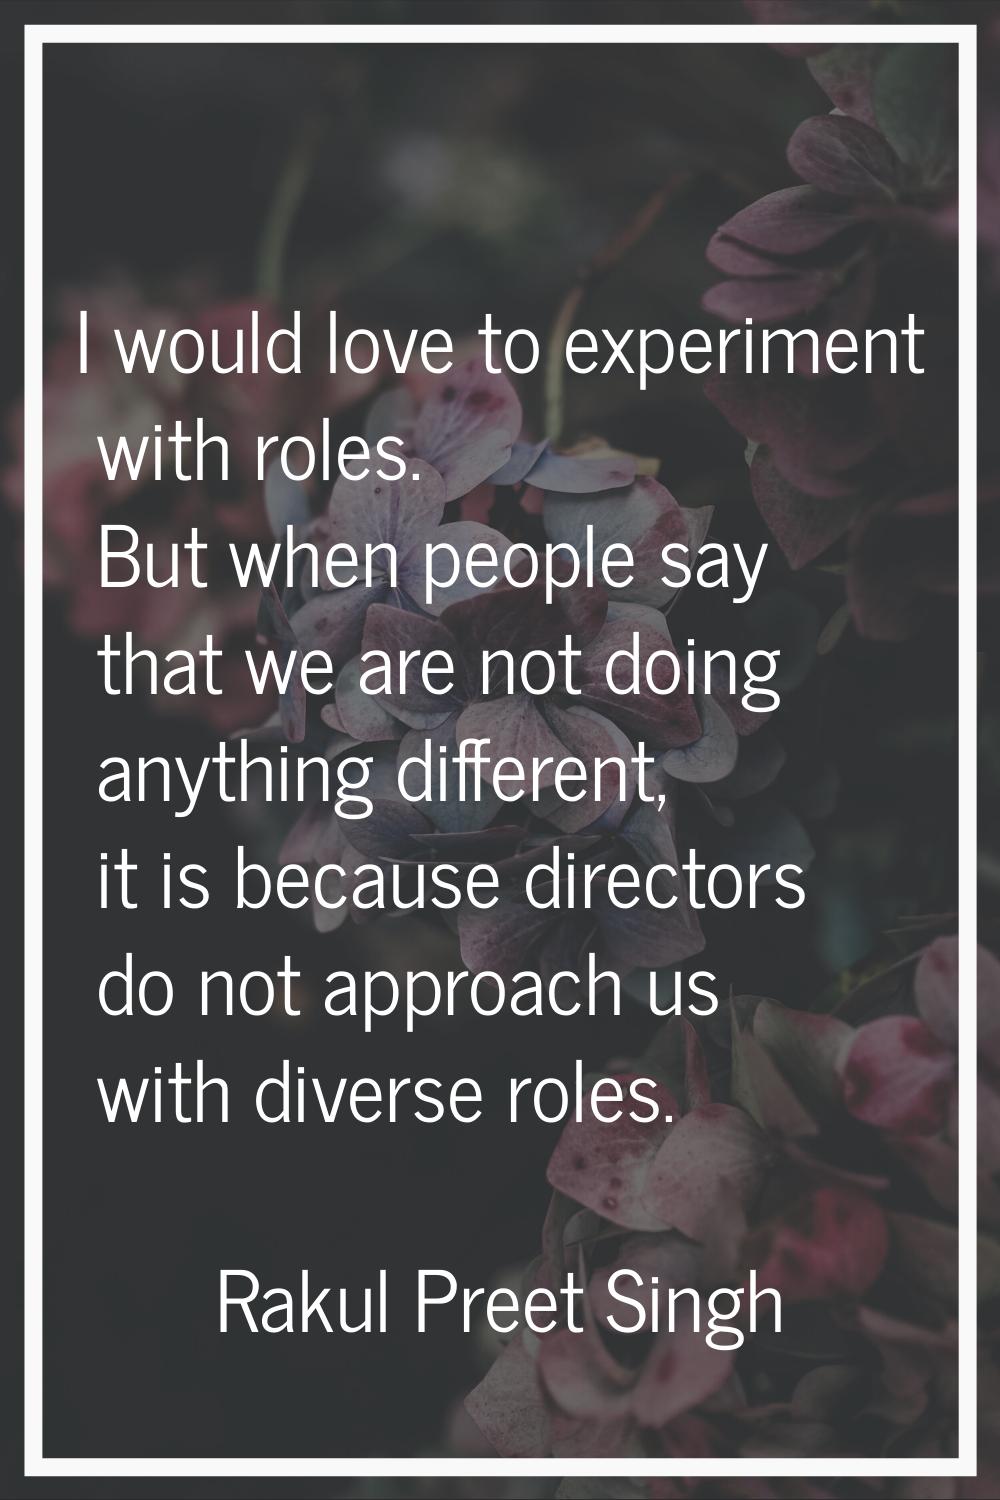 I would love to experiment with roles. But when people say that we are not doing anything different